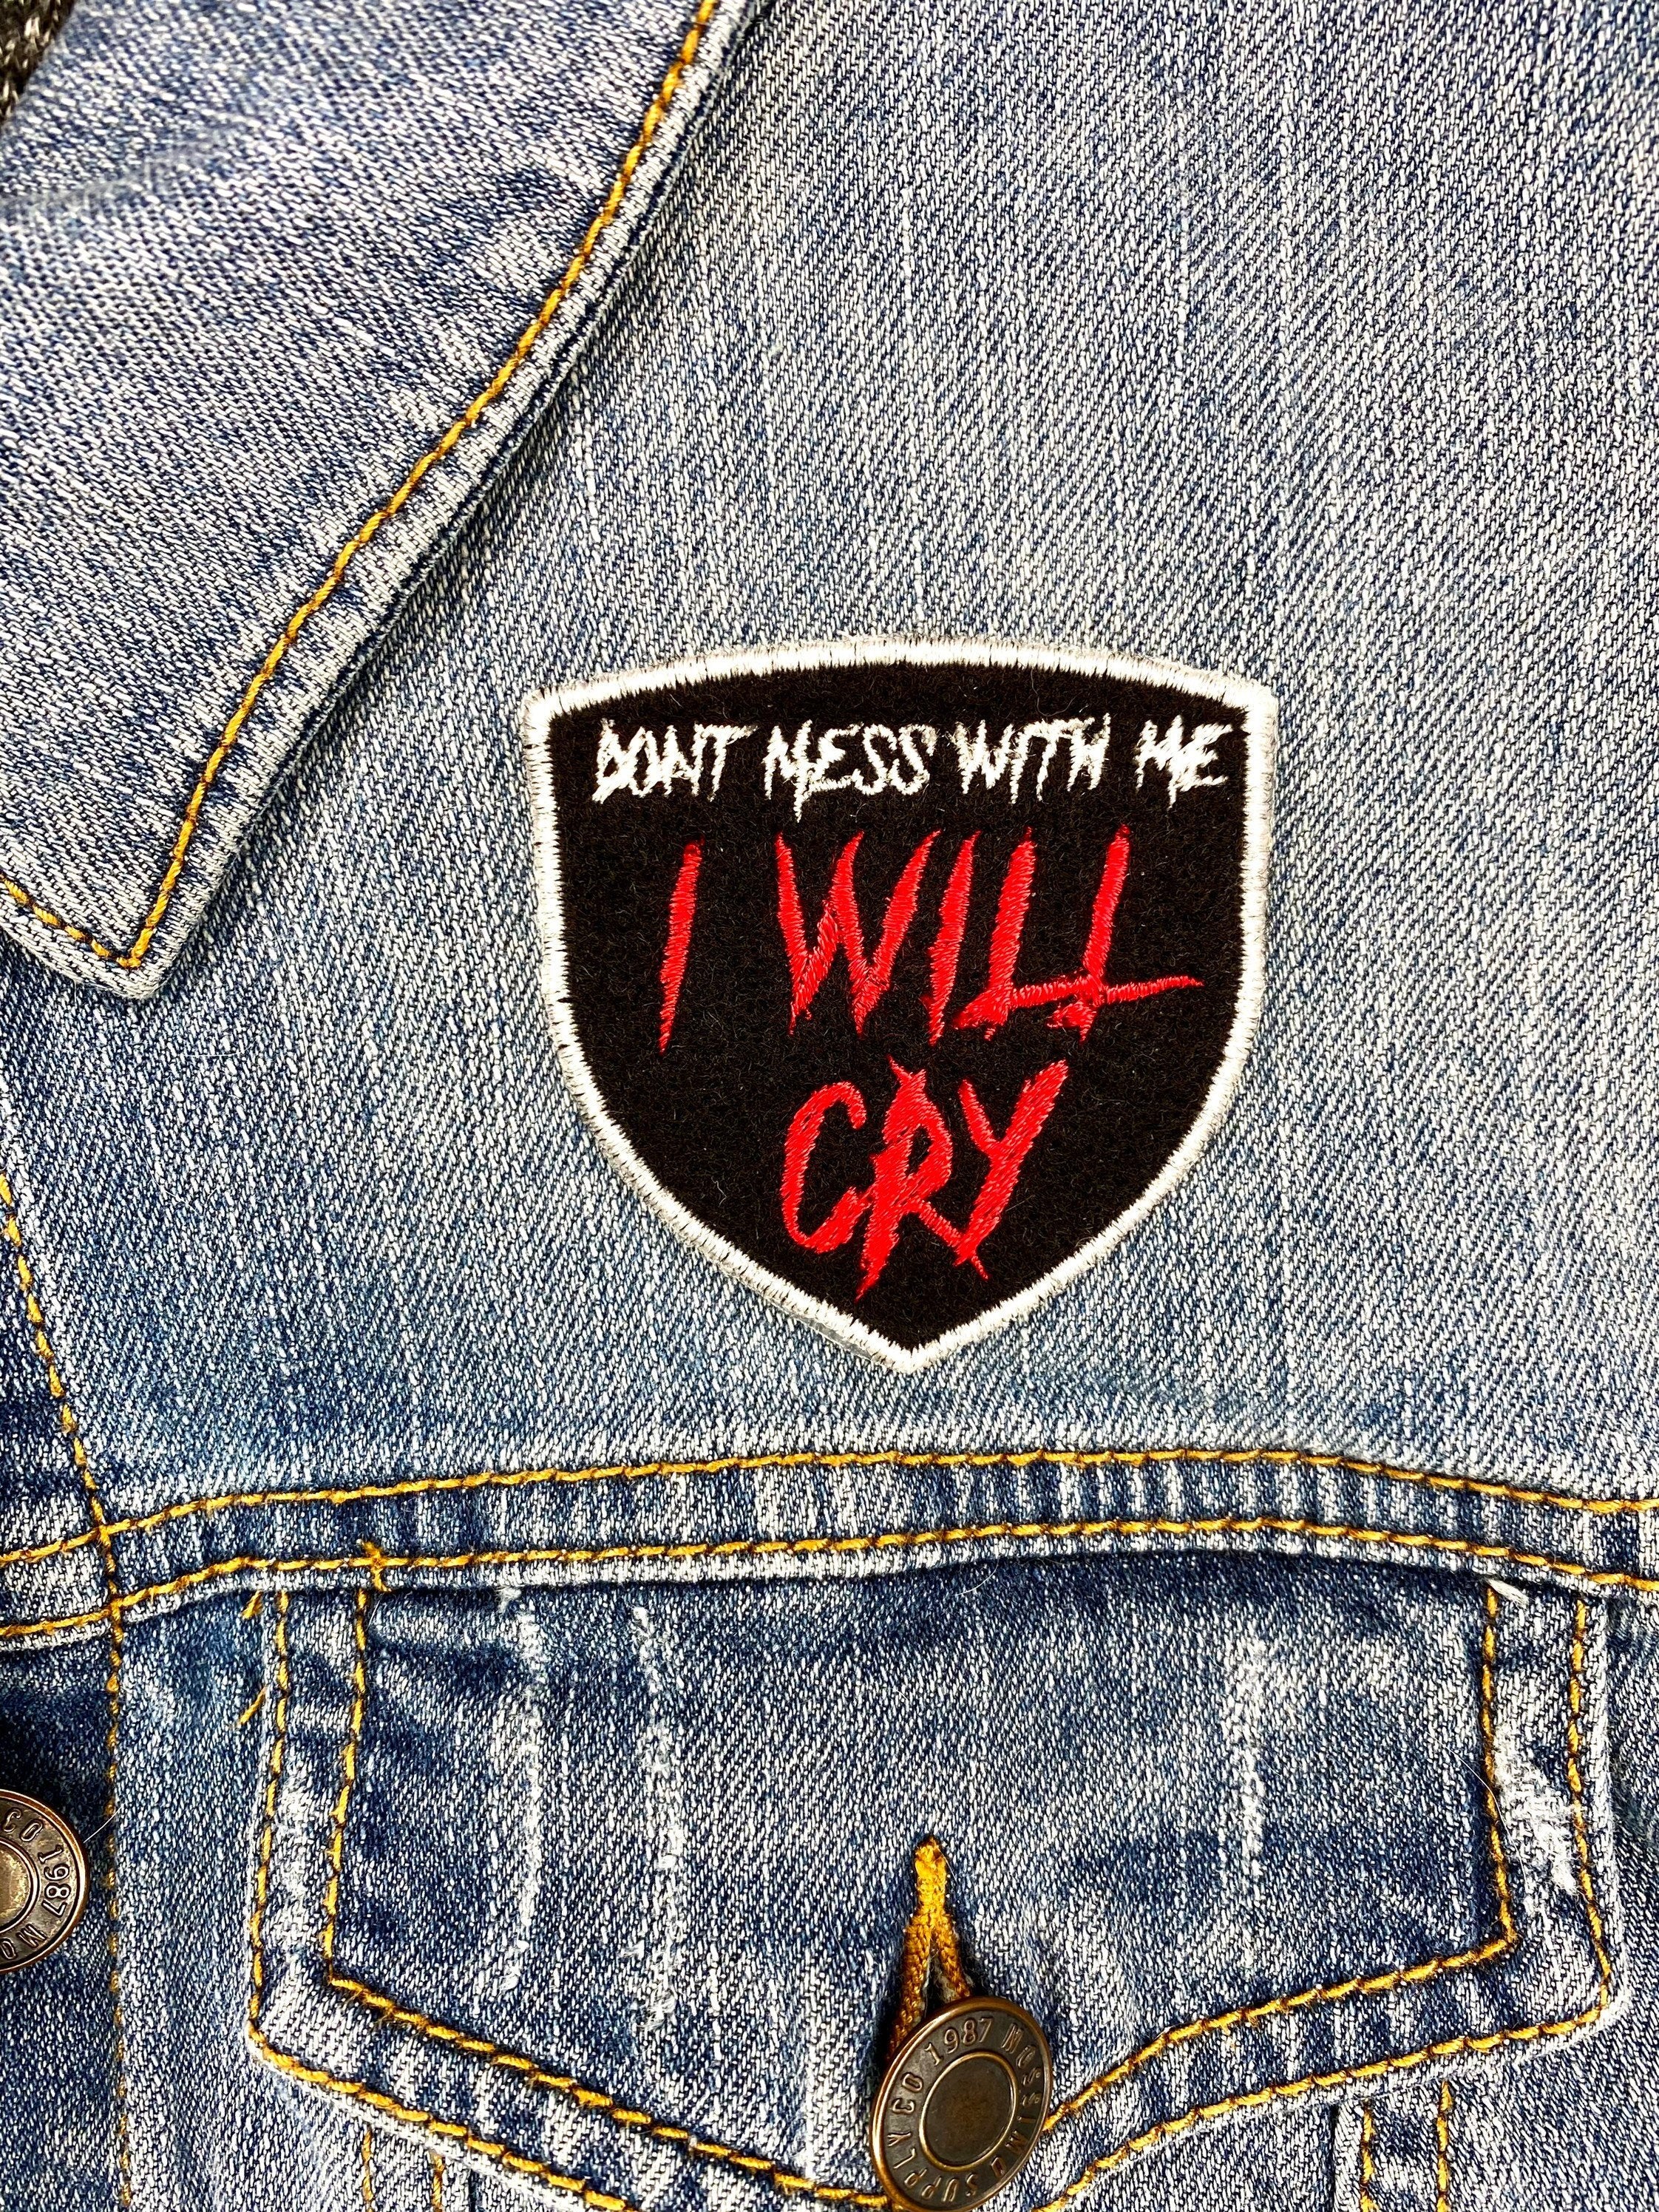 Don’t Mess With Me Embroidered Iron-on Patch - IncredibleGood Inc